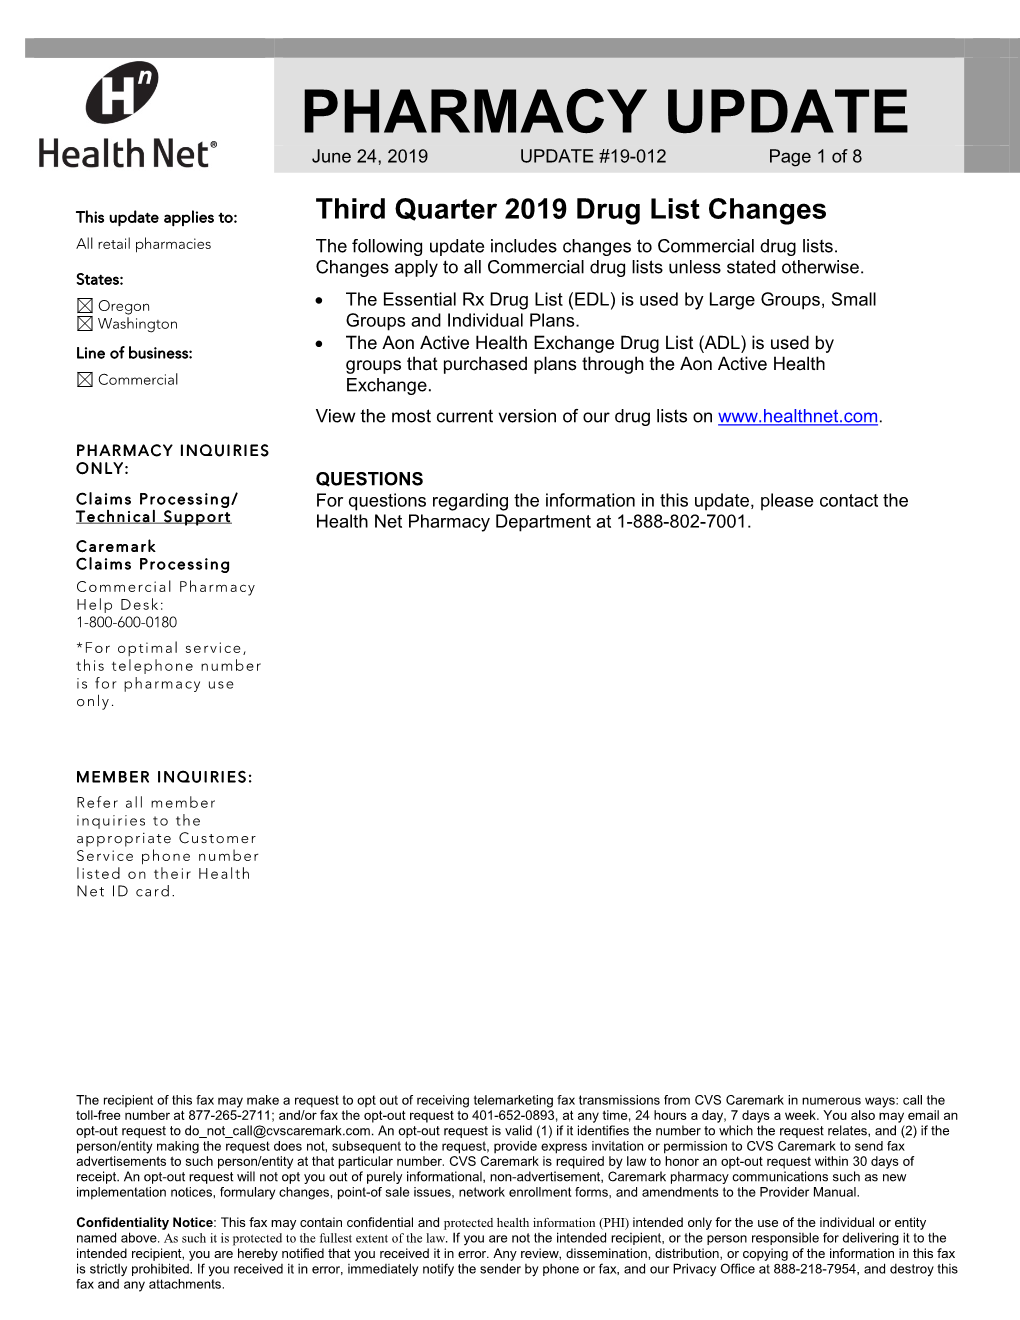 PHARMACY UPDATE June 24, 2019 UPDATE #19-012 Page 1 of 8